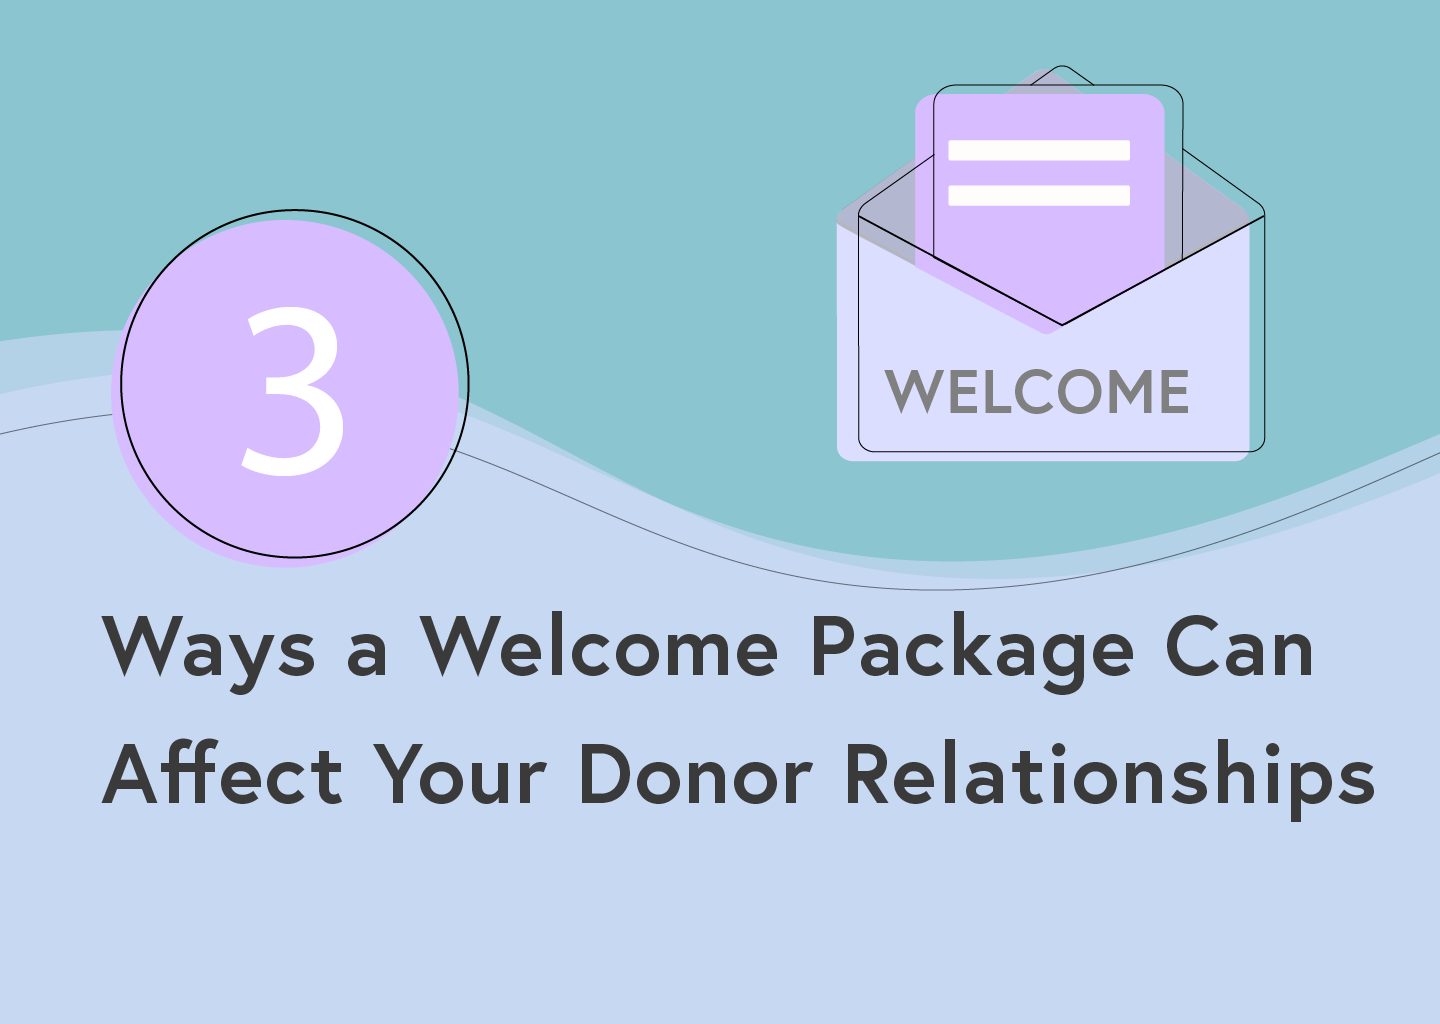 3 Ways a Welcome Package Can Affect Your Donor Relationships